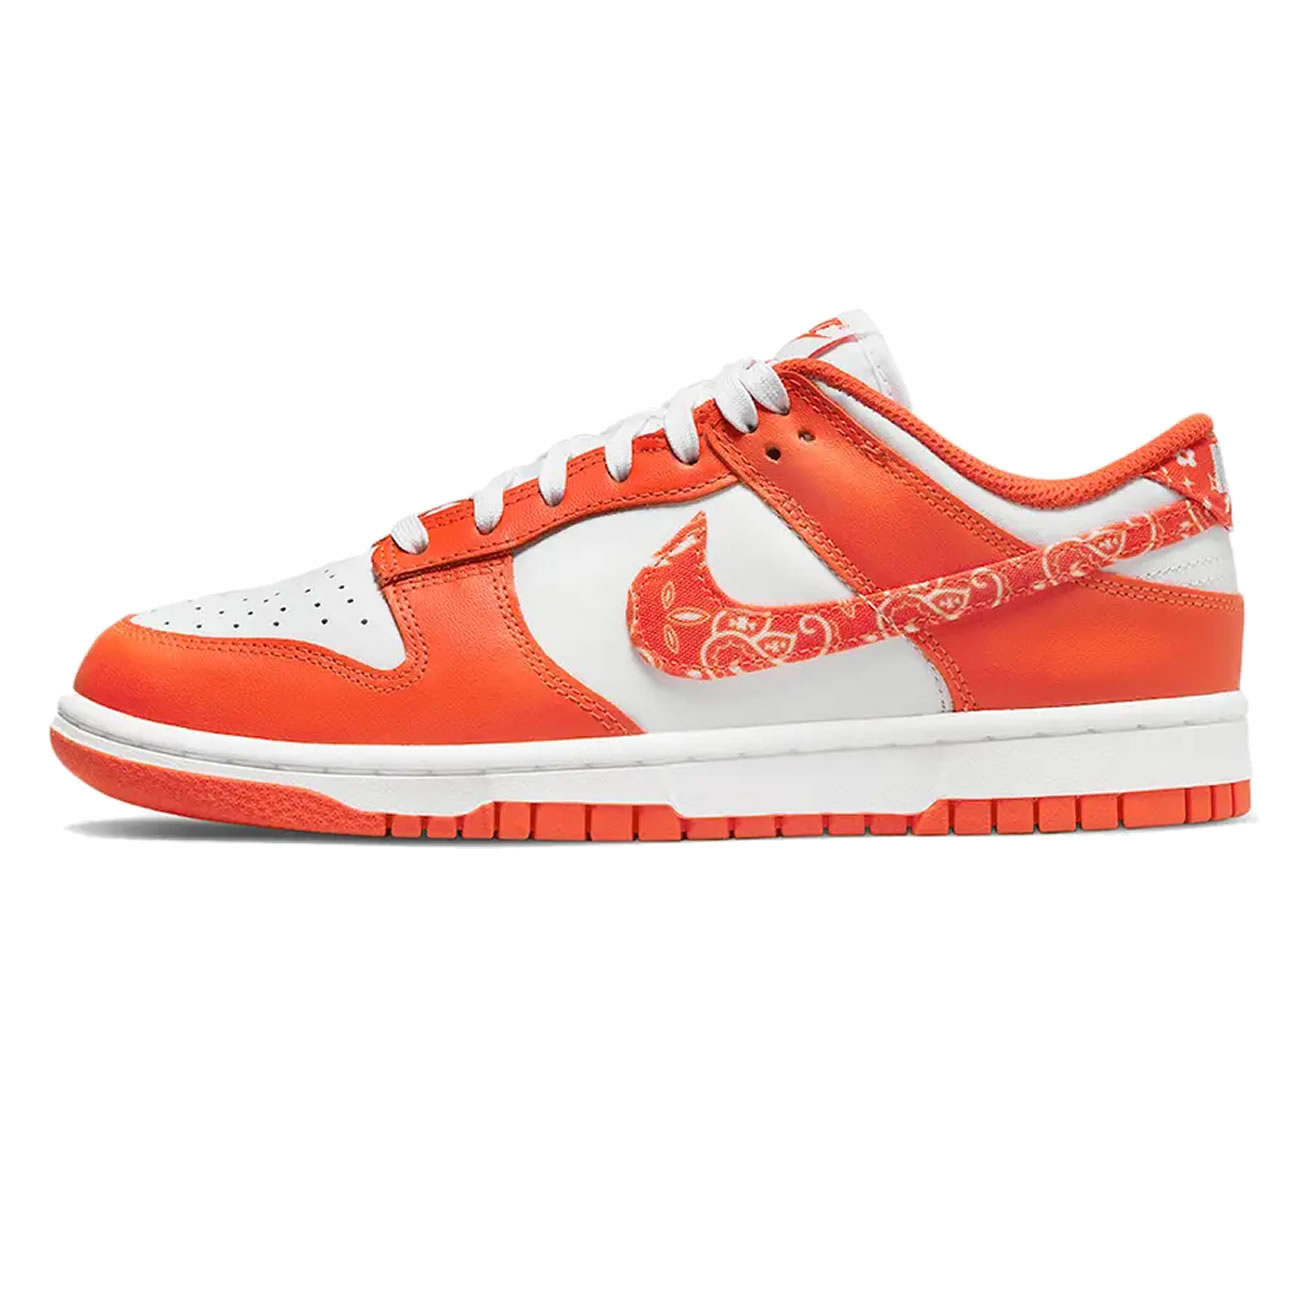 Nike Dunk Low Essential Paisley Pack Orange W Dh4401 103 (1) - newkick.org